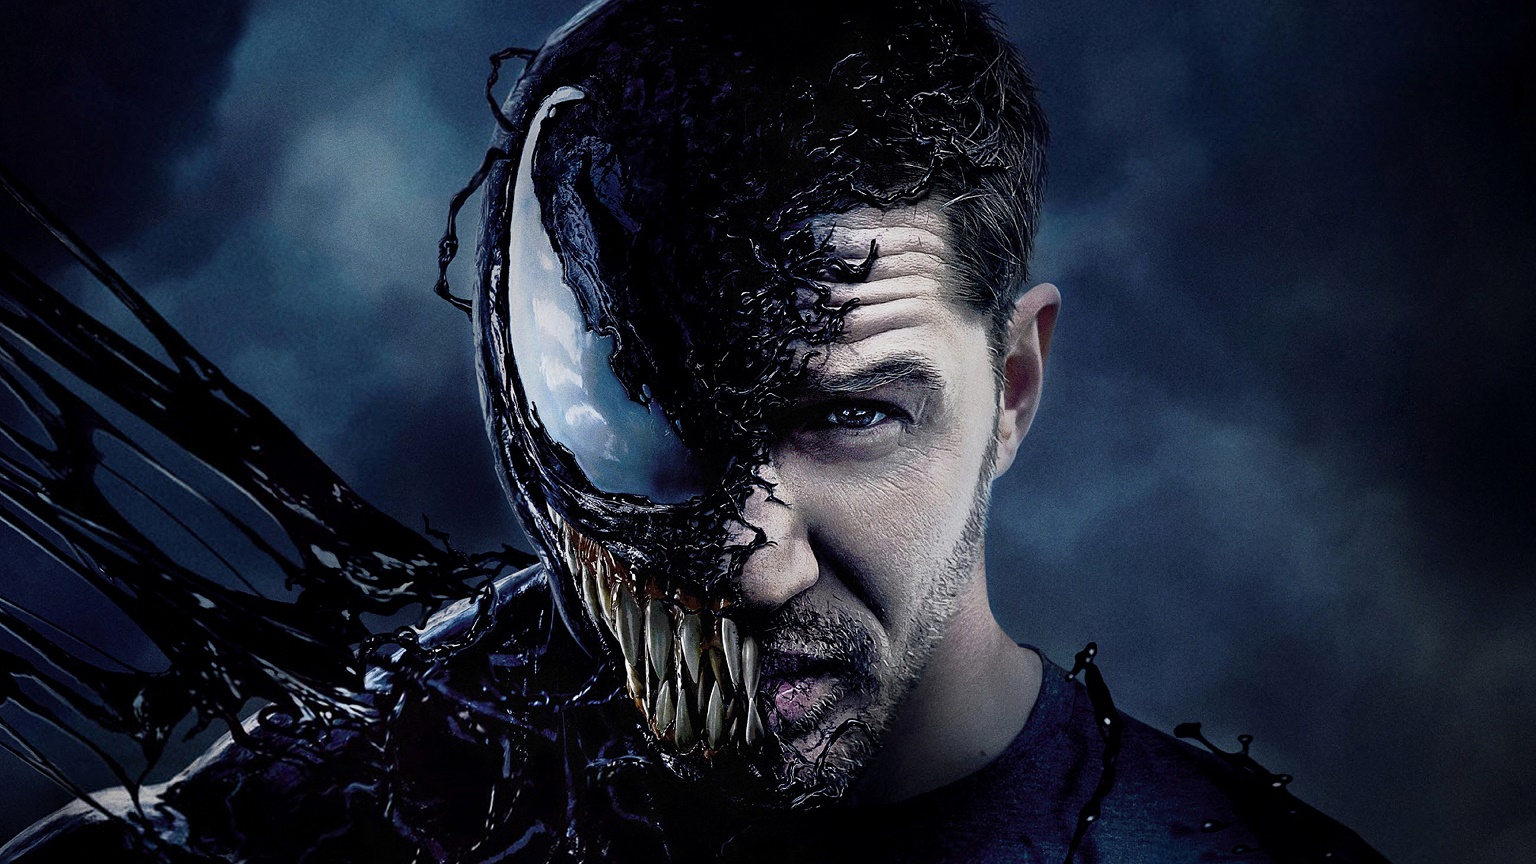 Venom 2 Trailer, Release Date, Cast, Plot Spoilers, Spider-Man Cameo and More Updates on the Sequel